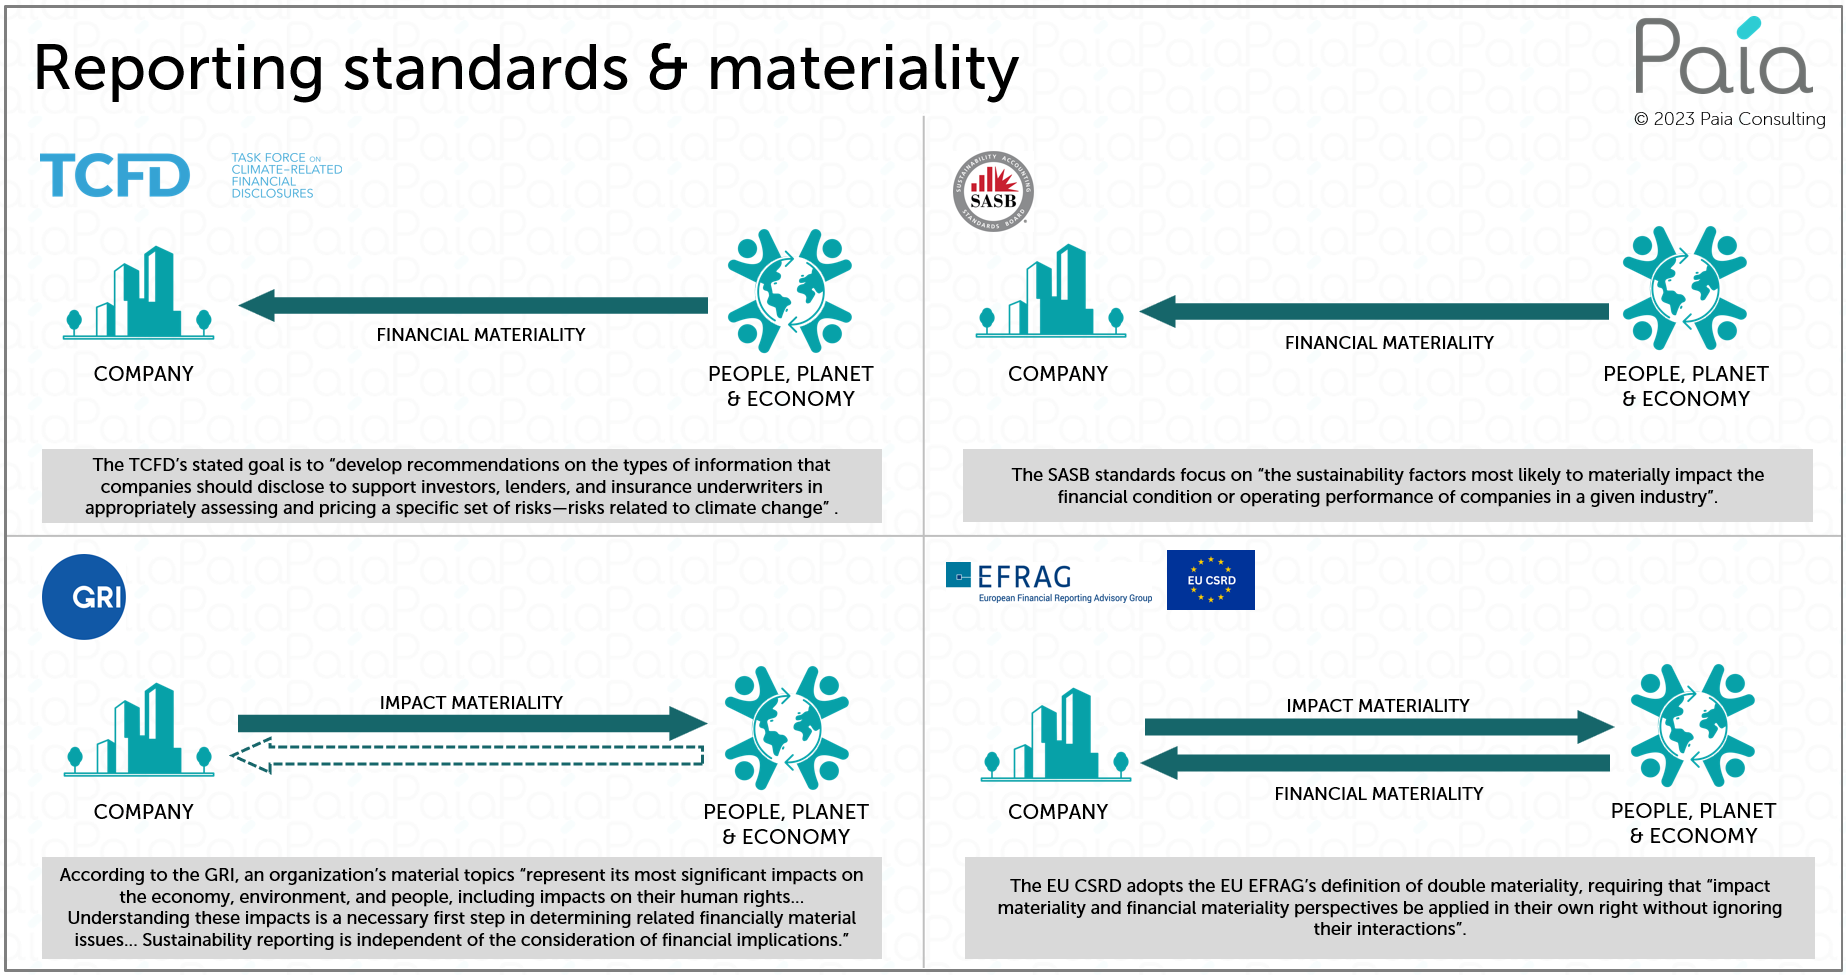 Reporting standards & materiality